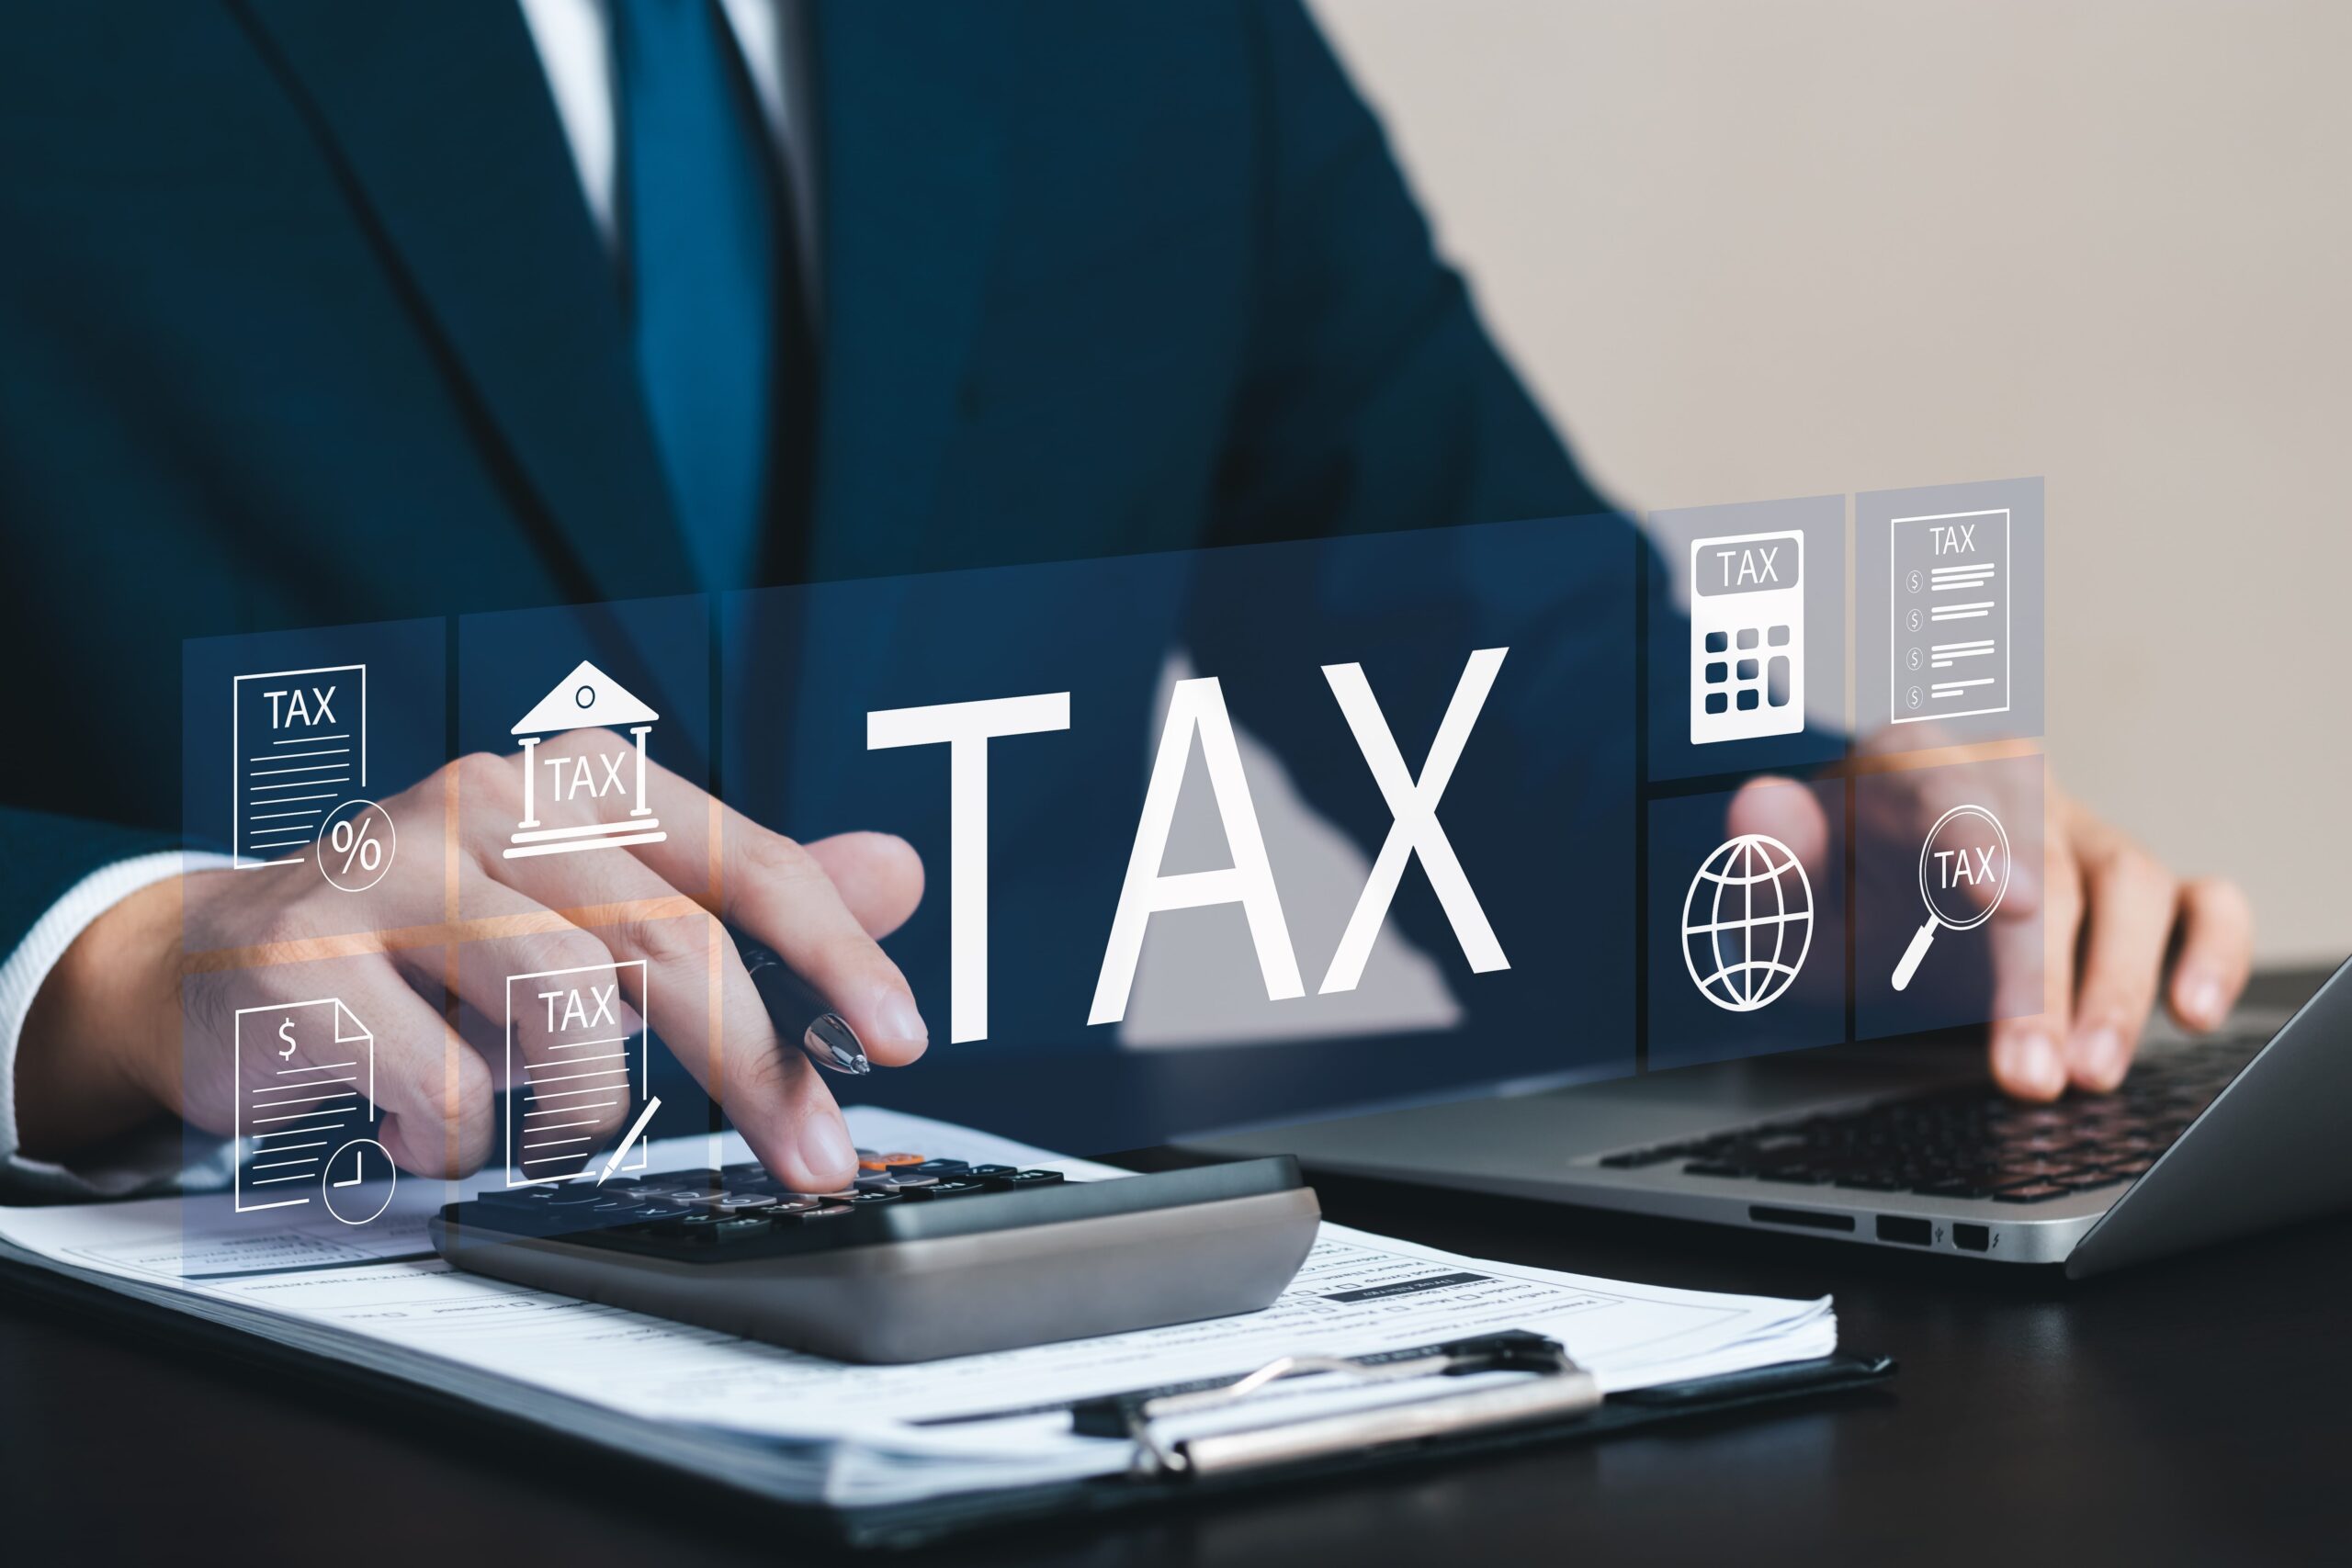 Tax, whether on your income, business or investments, can be a complicated